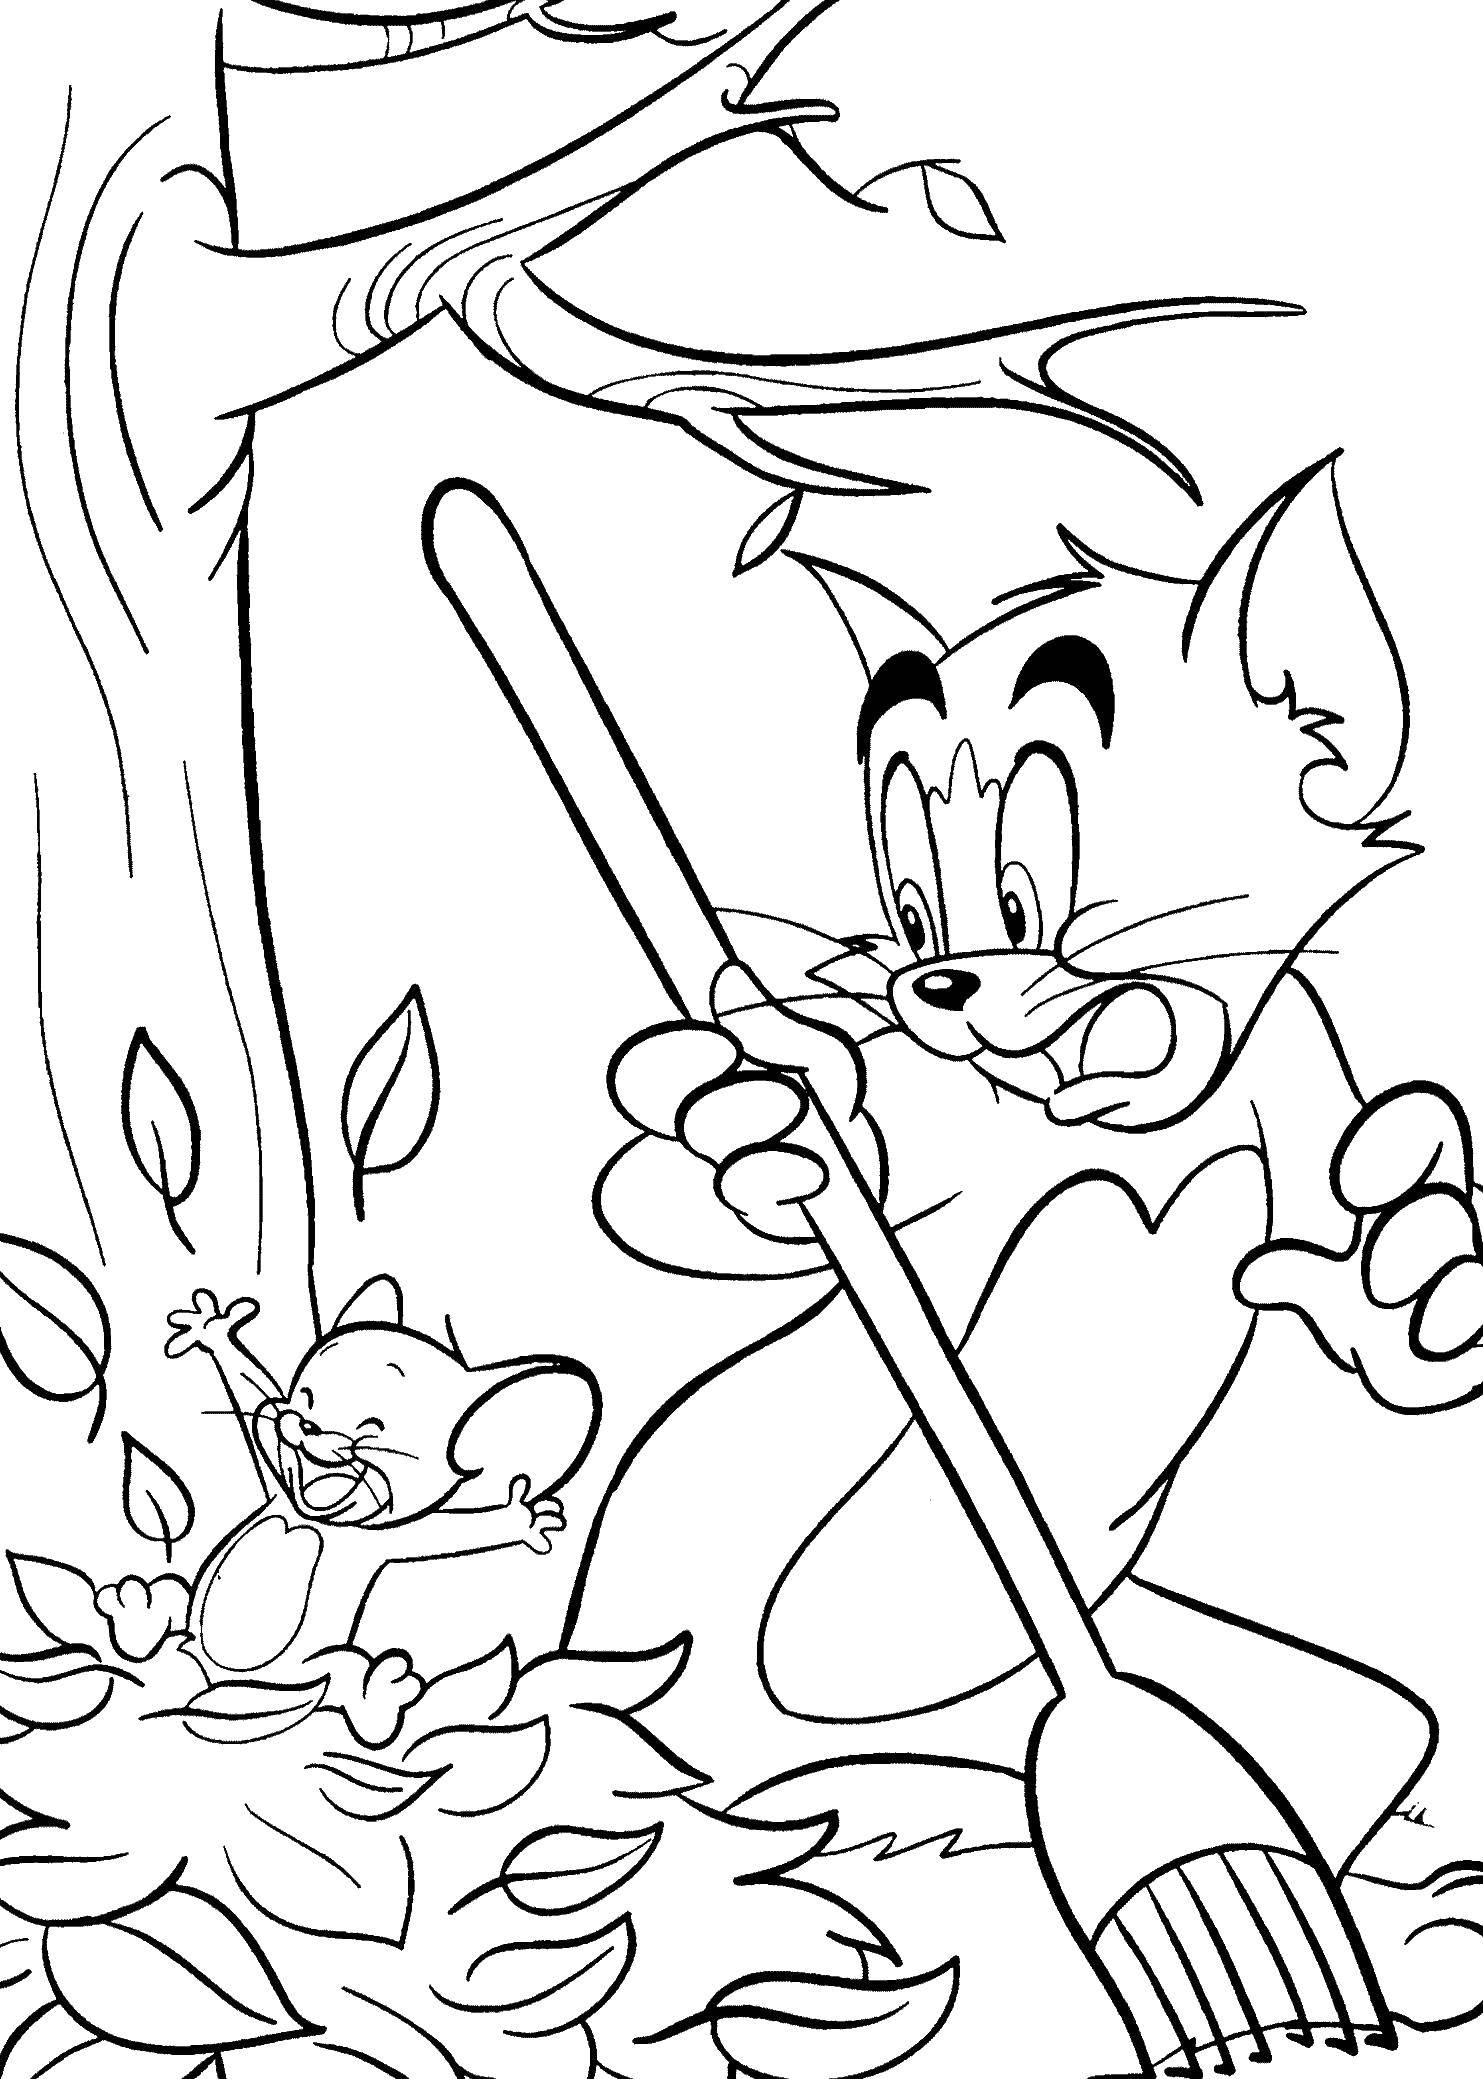 Coloring Tom and Jerry in autumn leaves. Category Autumn leaves falling. Tags:  Autumn, leaves.